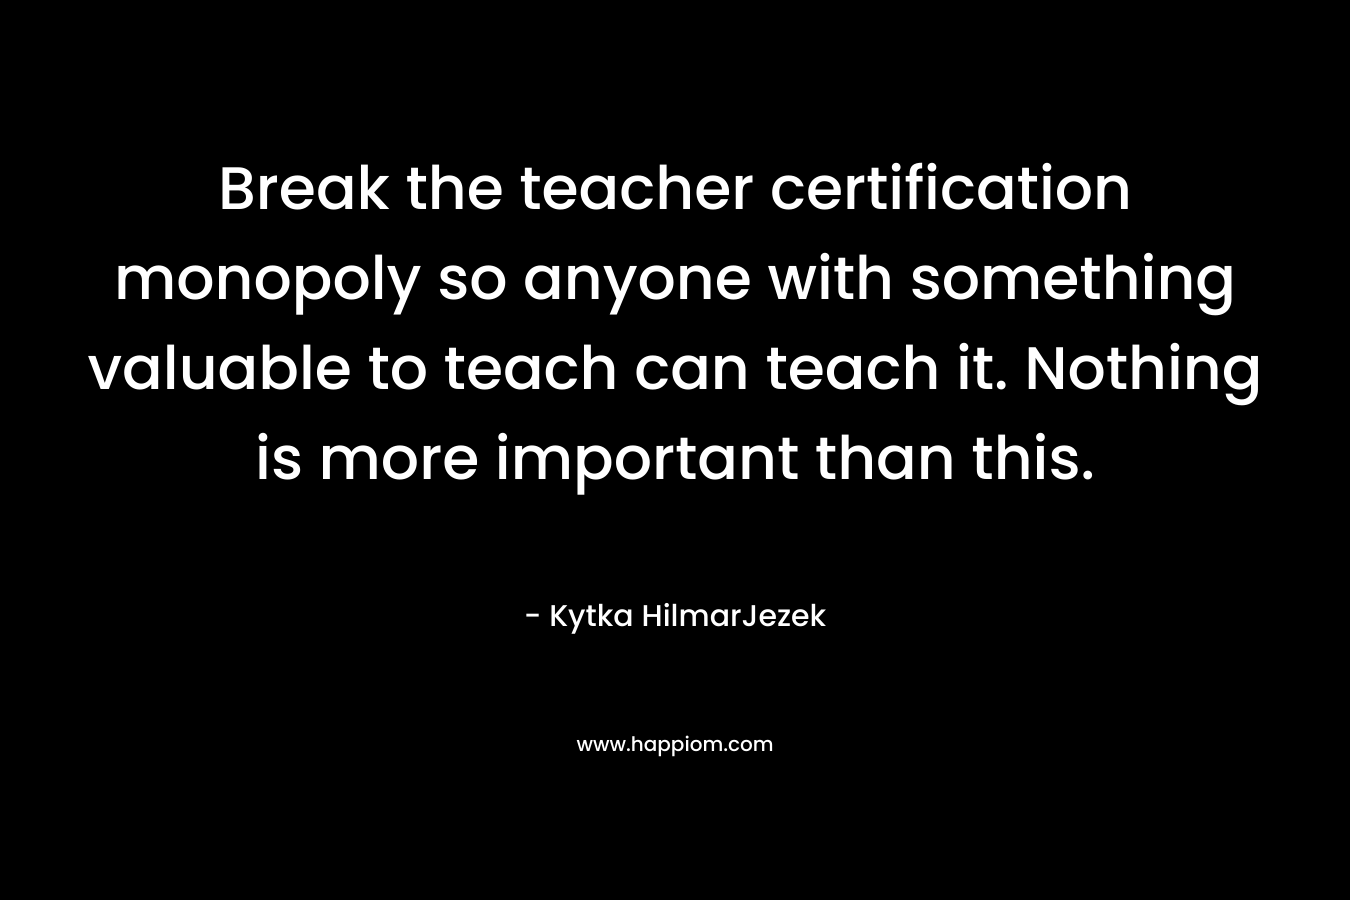 Break the teacher certification monopoly so anyone with something valuable to teach can teach it. Nothing is more important than this.